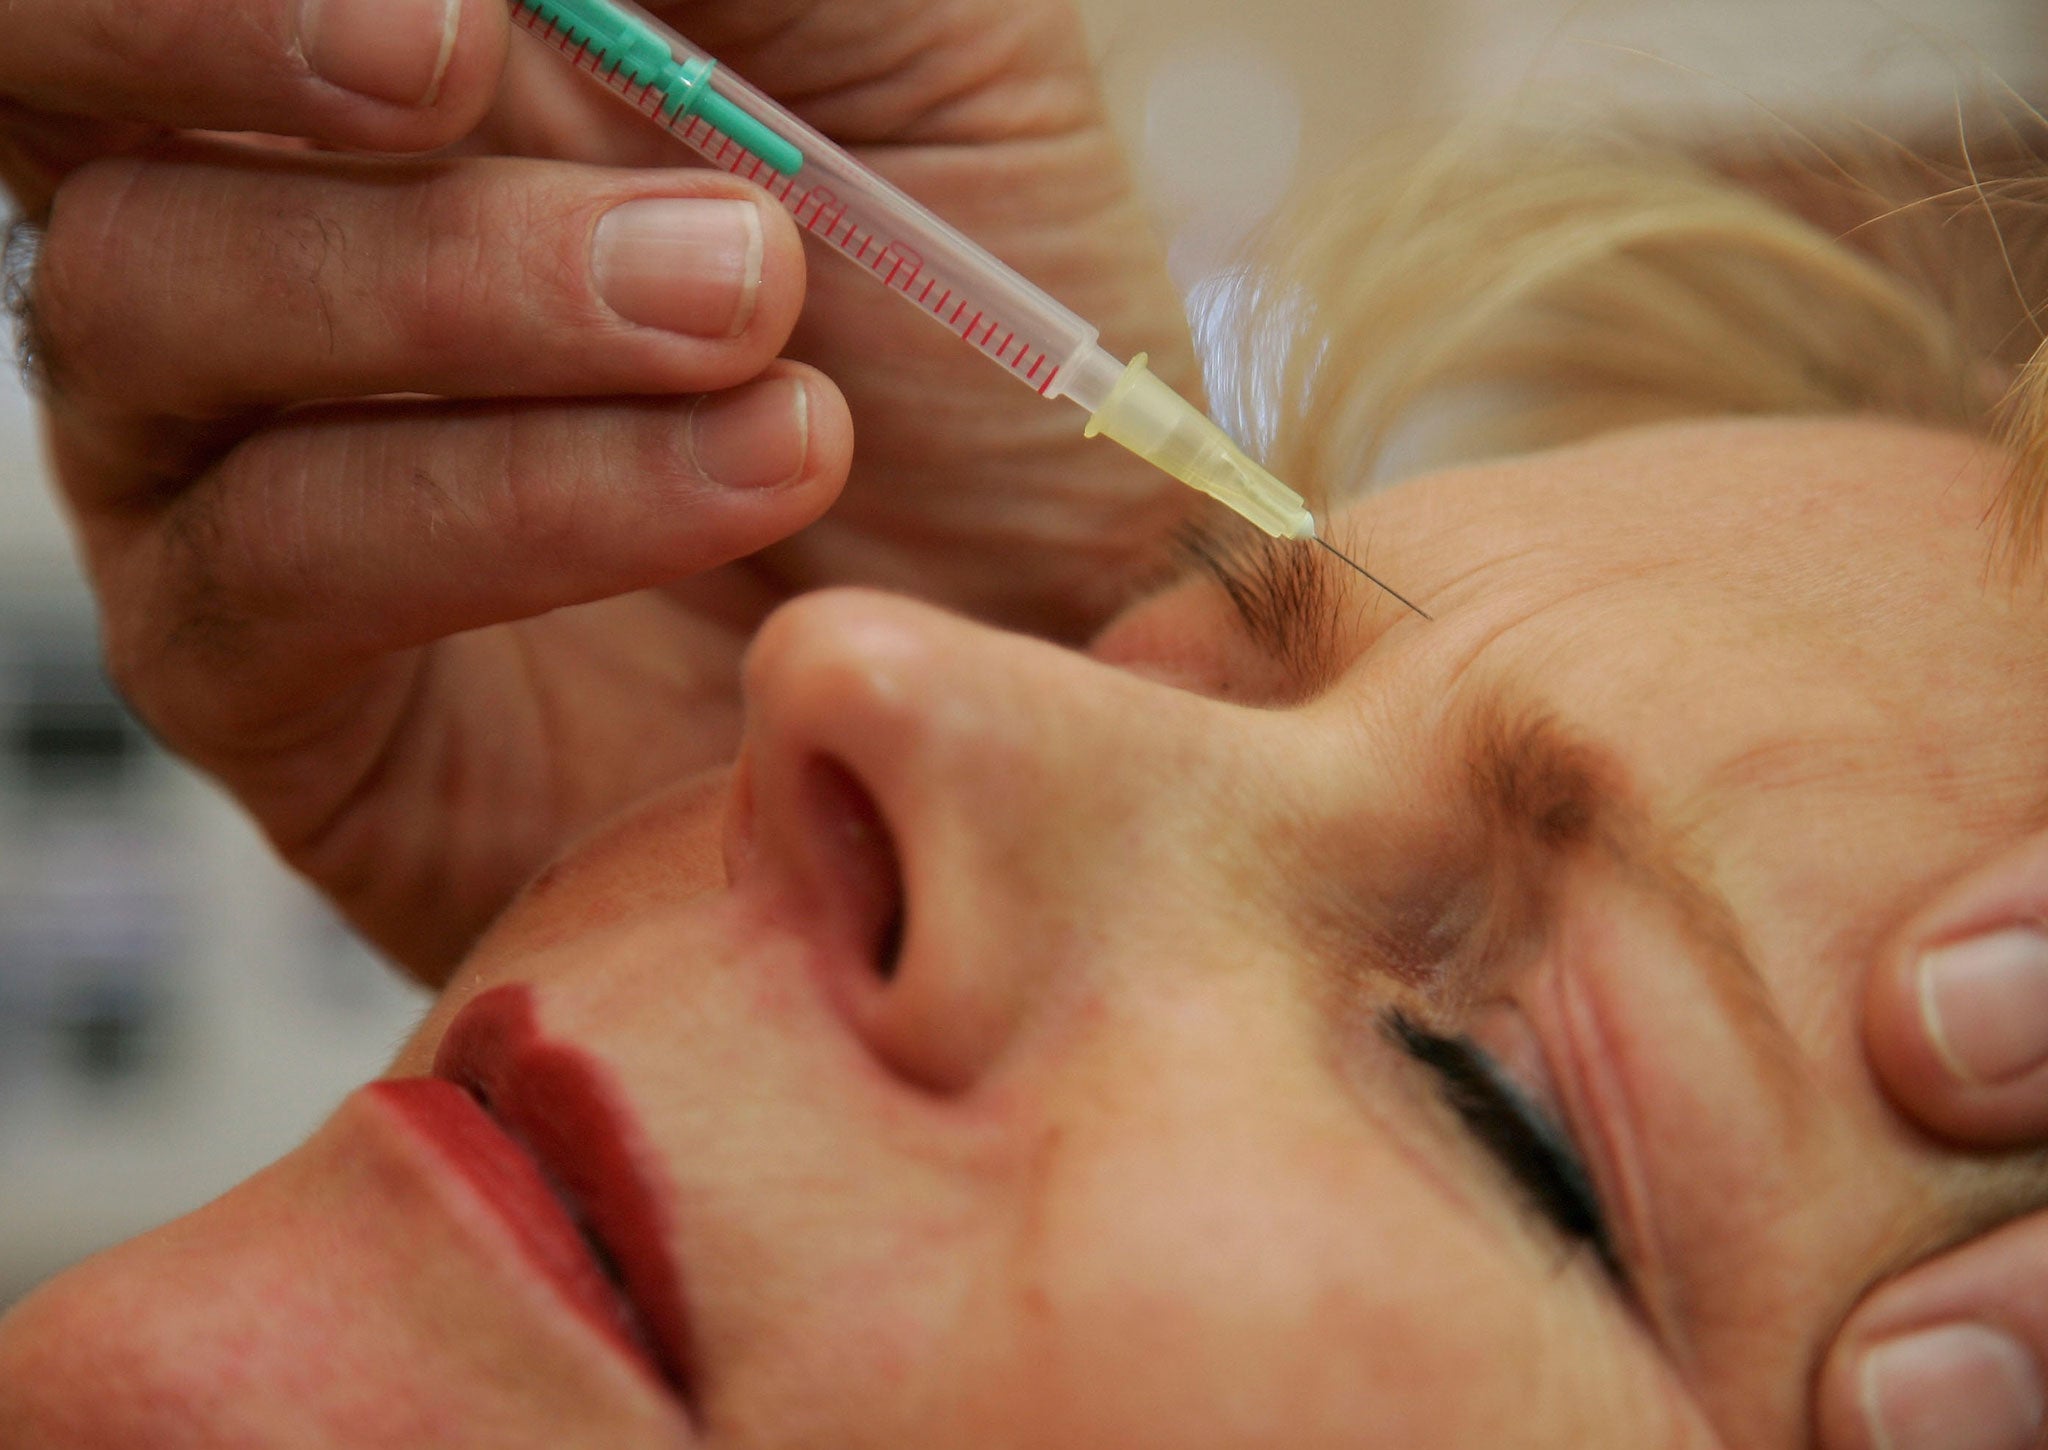 A doctor injects a patient with Botox at a cosmetic treatment centre